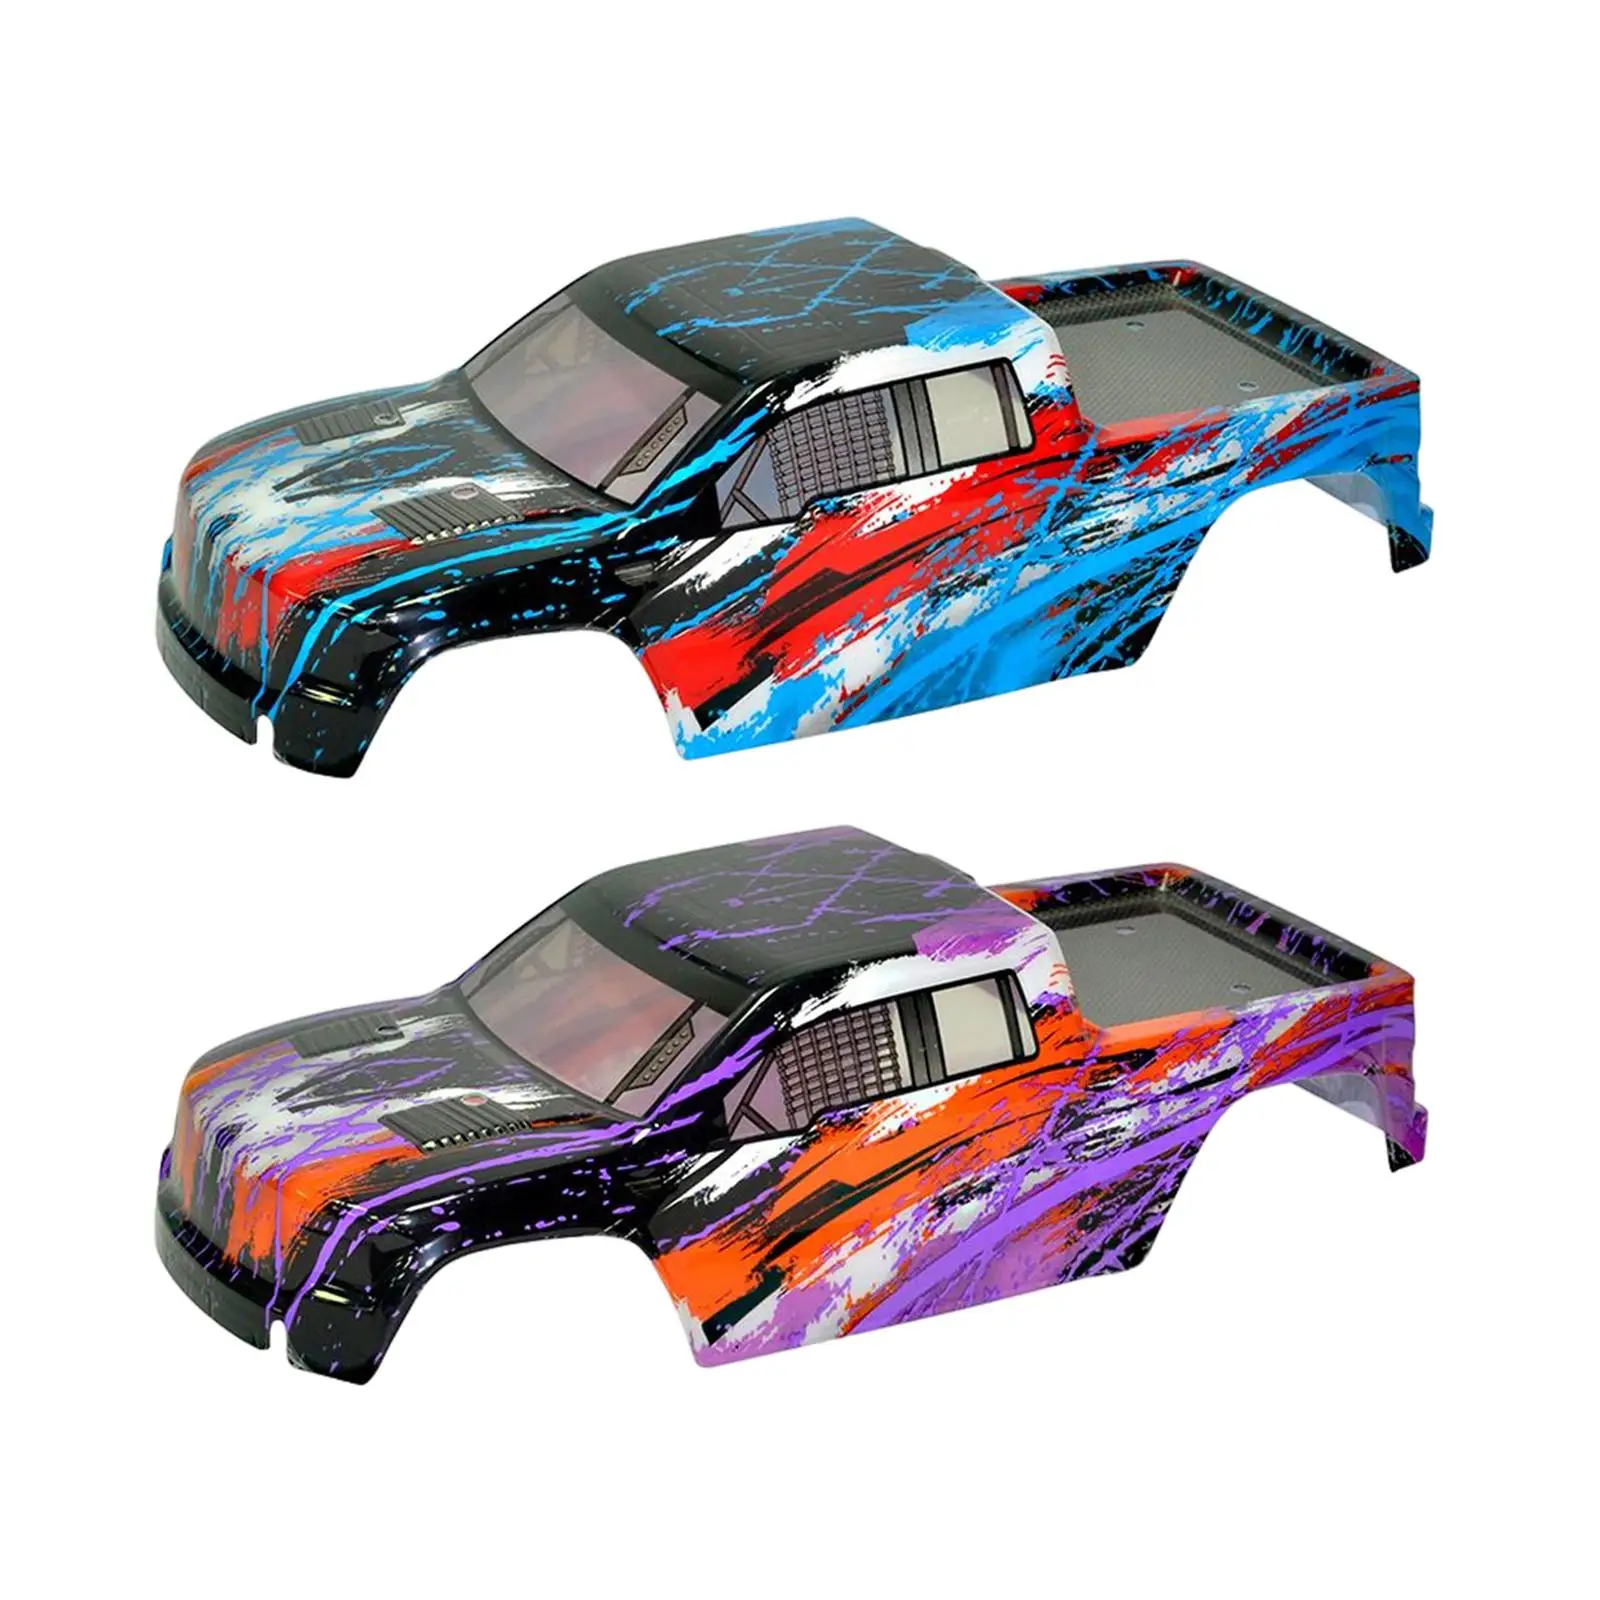 jifengmusical 90132 RC Body Shell Painted for 903 903A 1:12 Scale RC Crawler Car